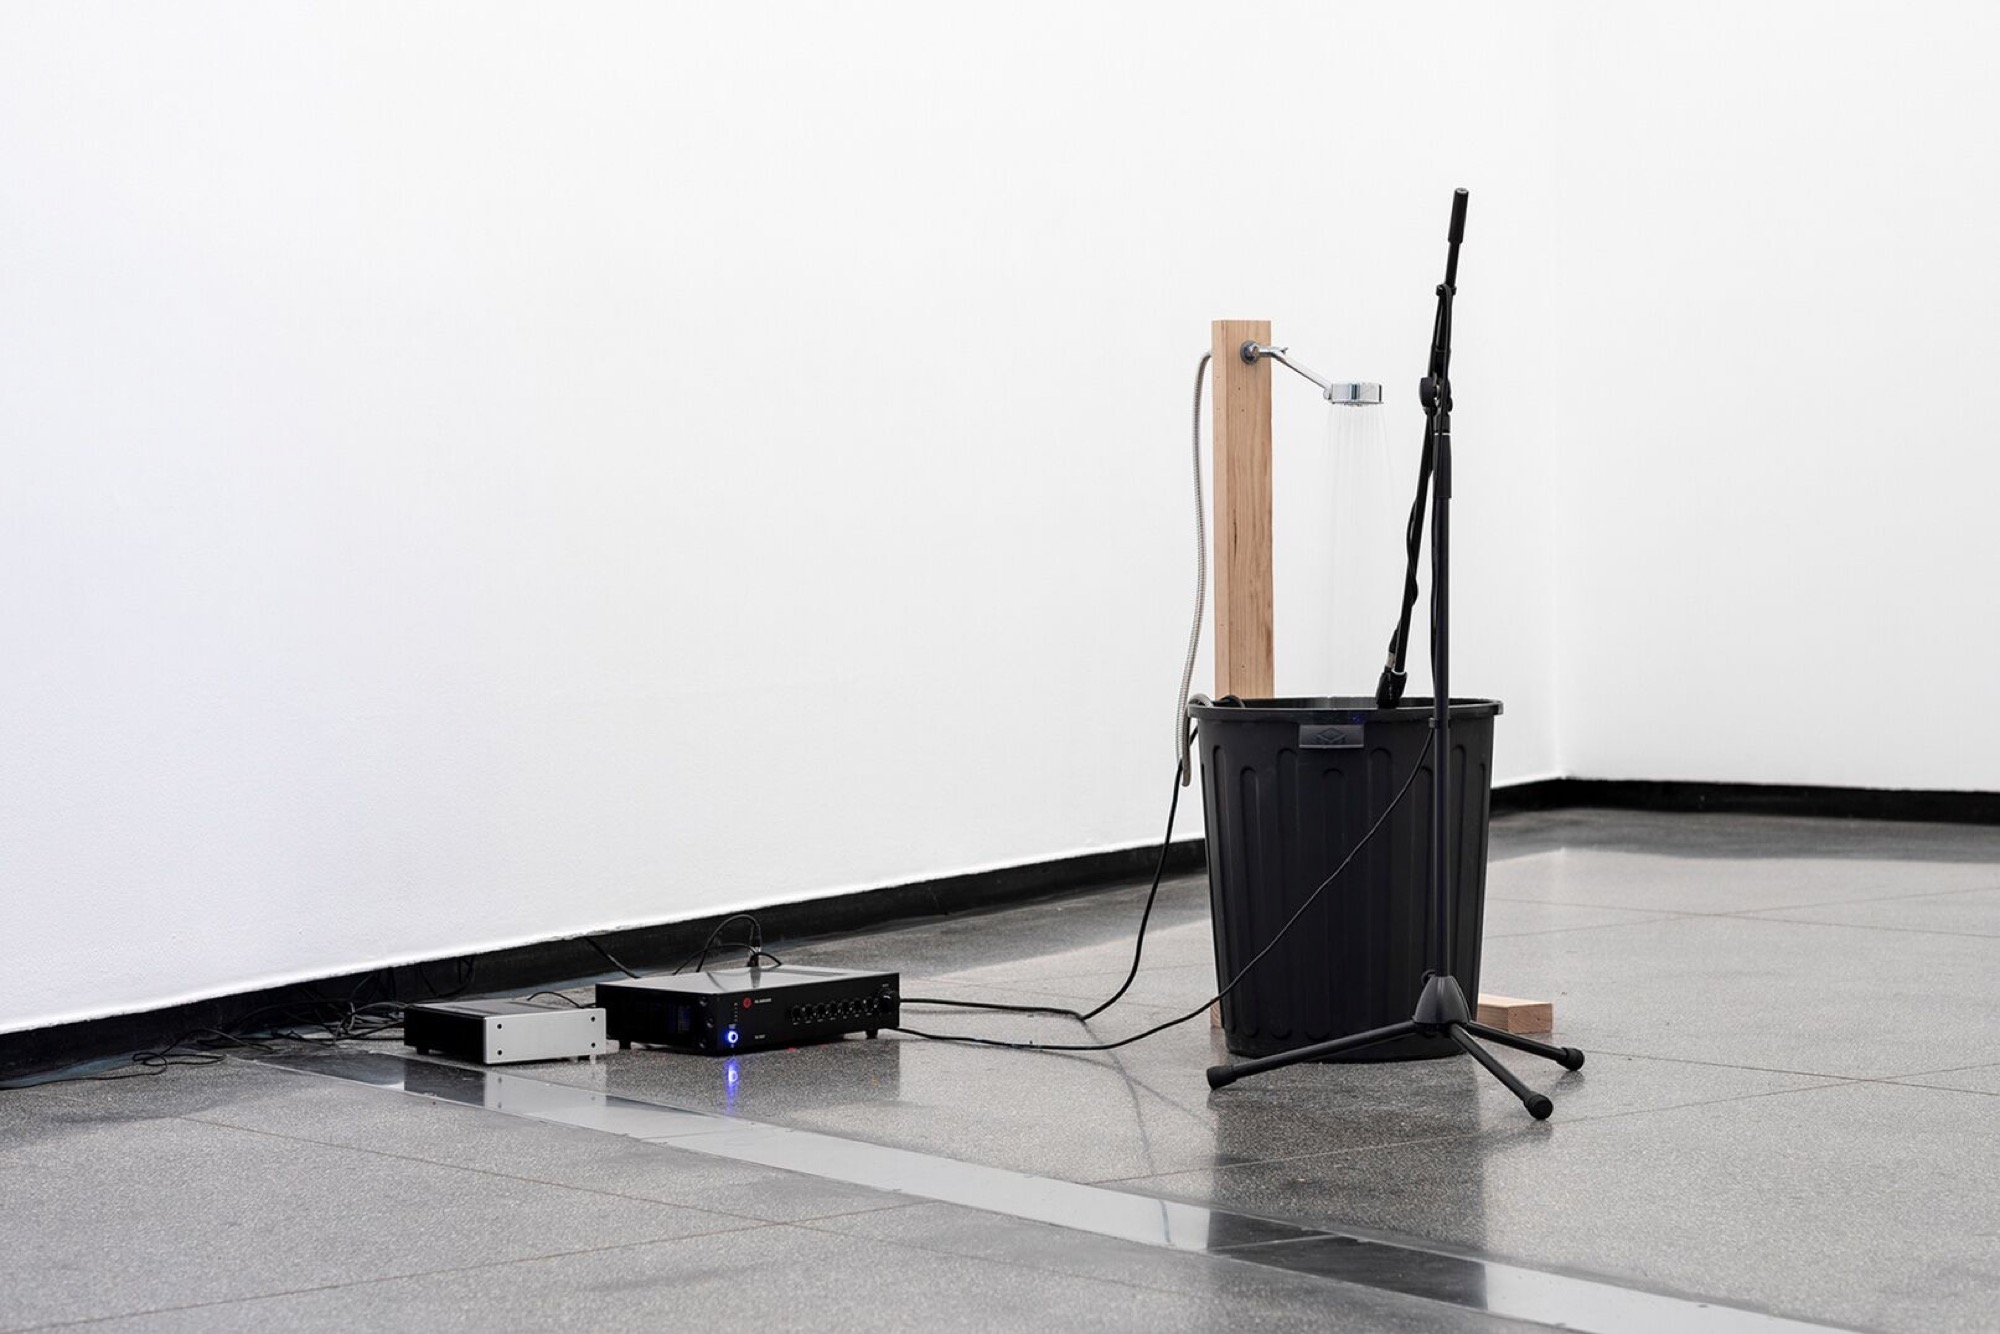 Haroon Mirza, Copy of Pavilion for optimisation 2019 (detail), installation view, Australian Centre of Contemporary Art, Melbourne. Commissioned by ACCA. Courtesy the artist. Photograph: Andrew Curtis.